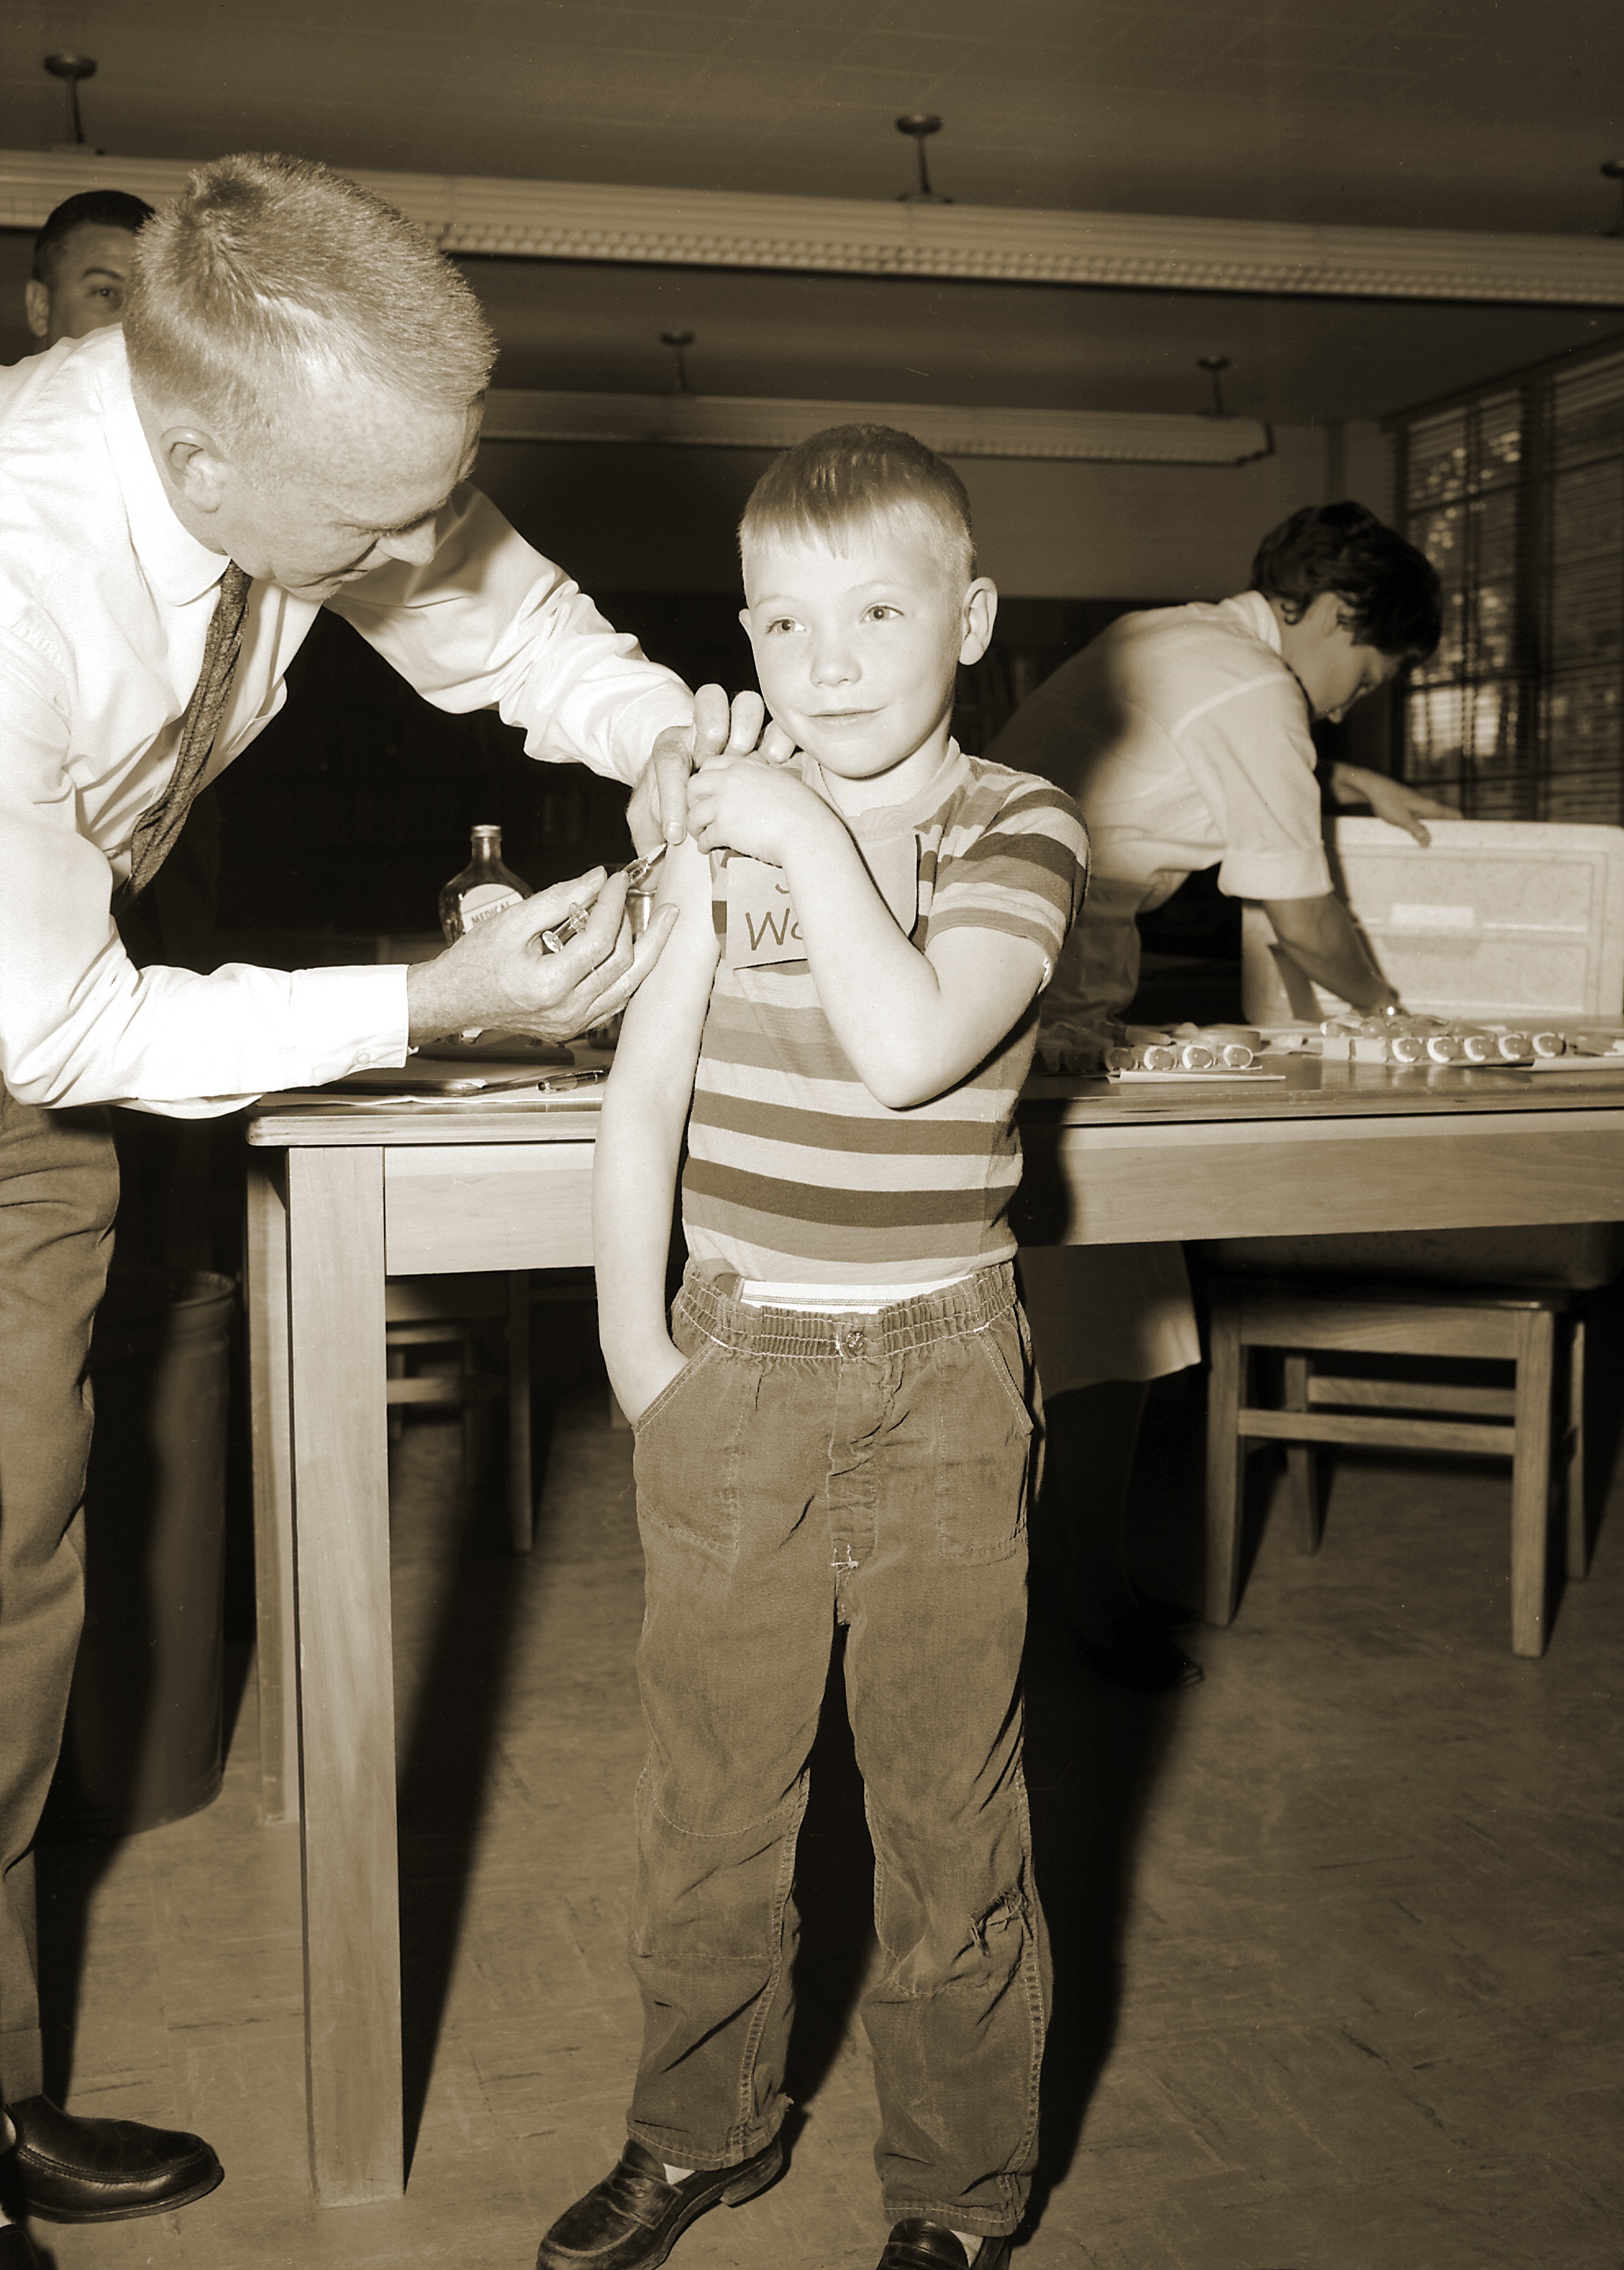 As part of the national immunization effort, this doctor was giving a measles vaccination to a young boy at Fernbank School in Atlanta, Georgia in 1962. (Smith Collection/Gado/Getty Images)